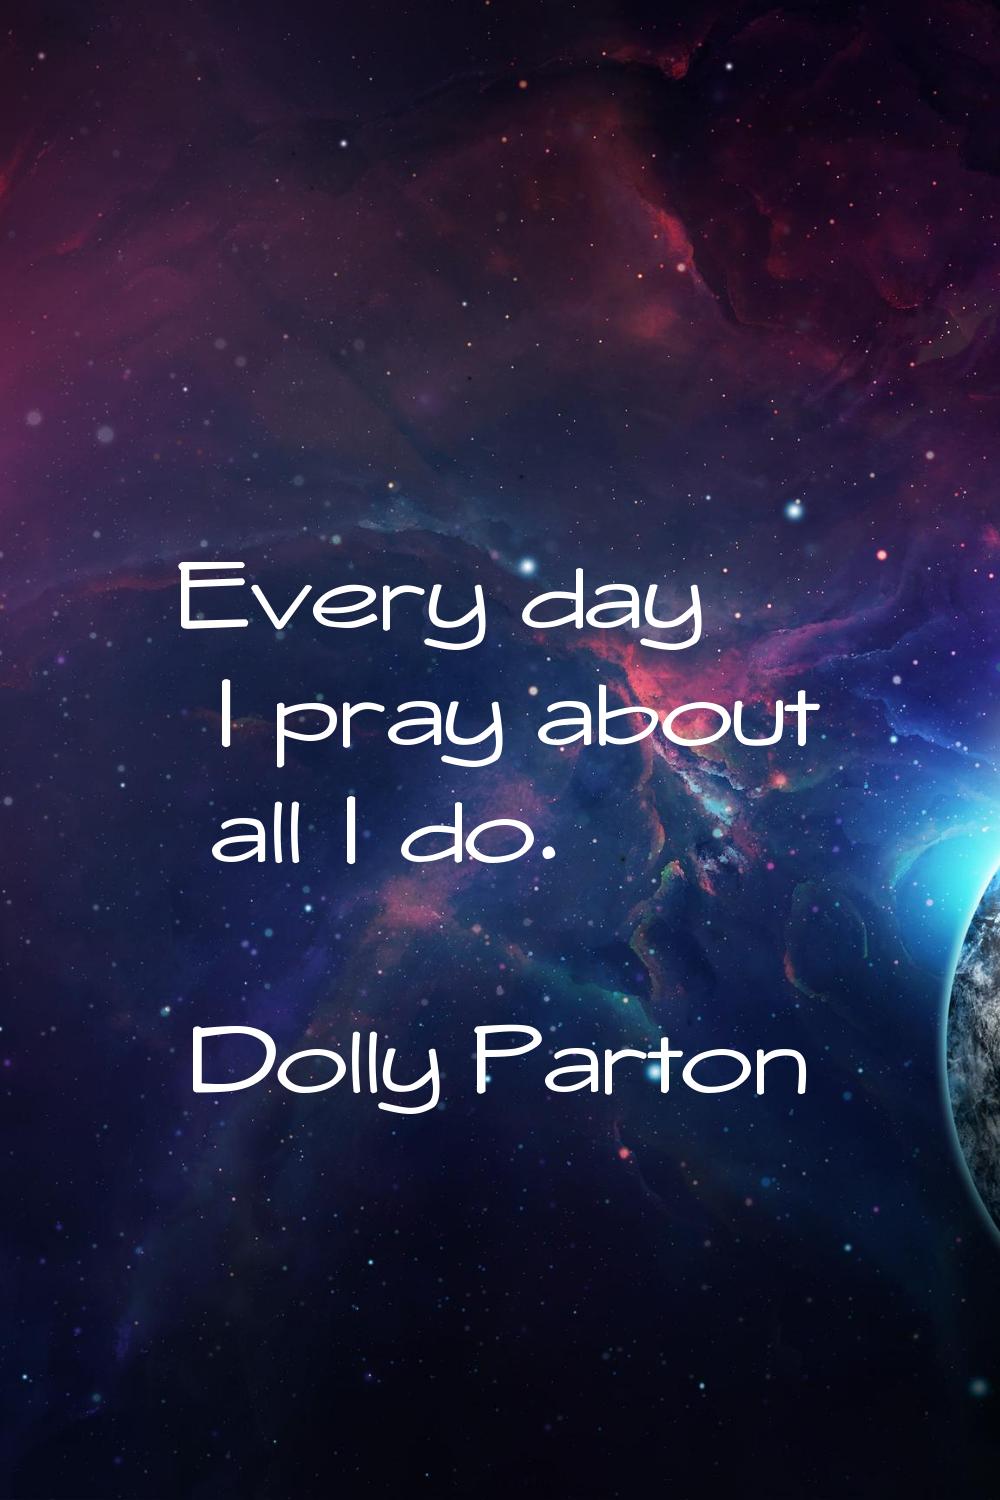 Every day I pray about all I do.